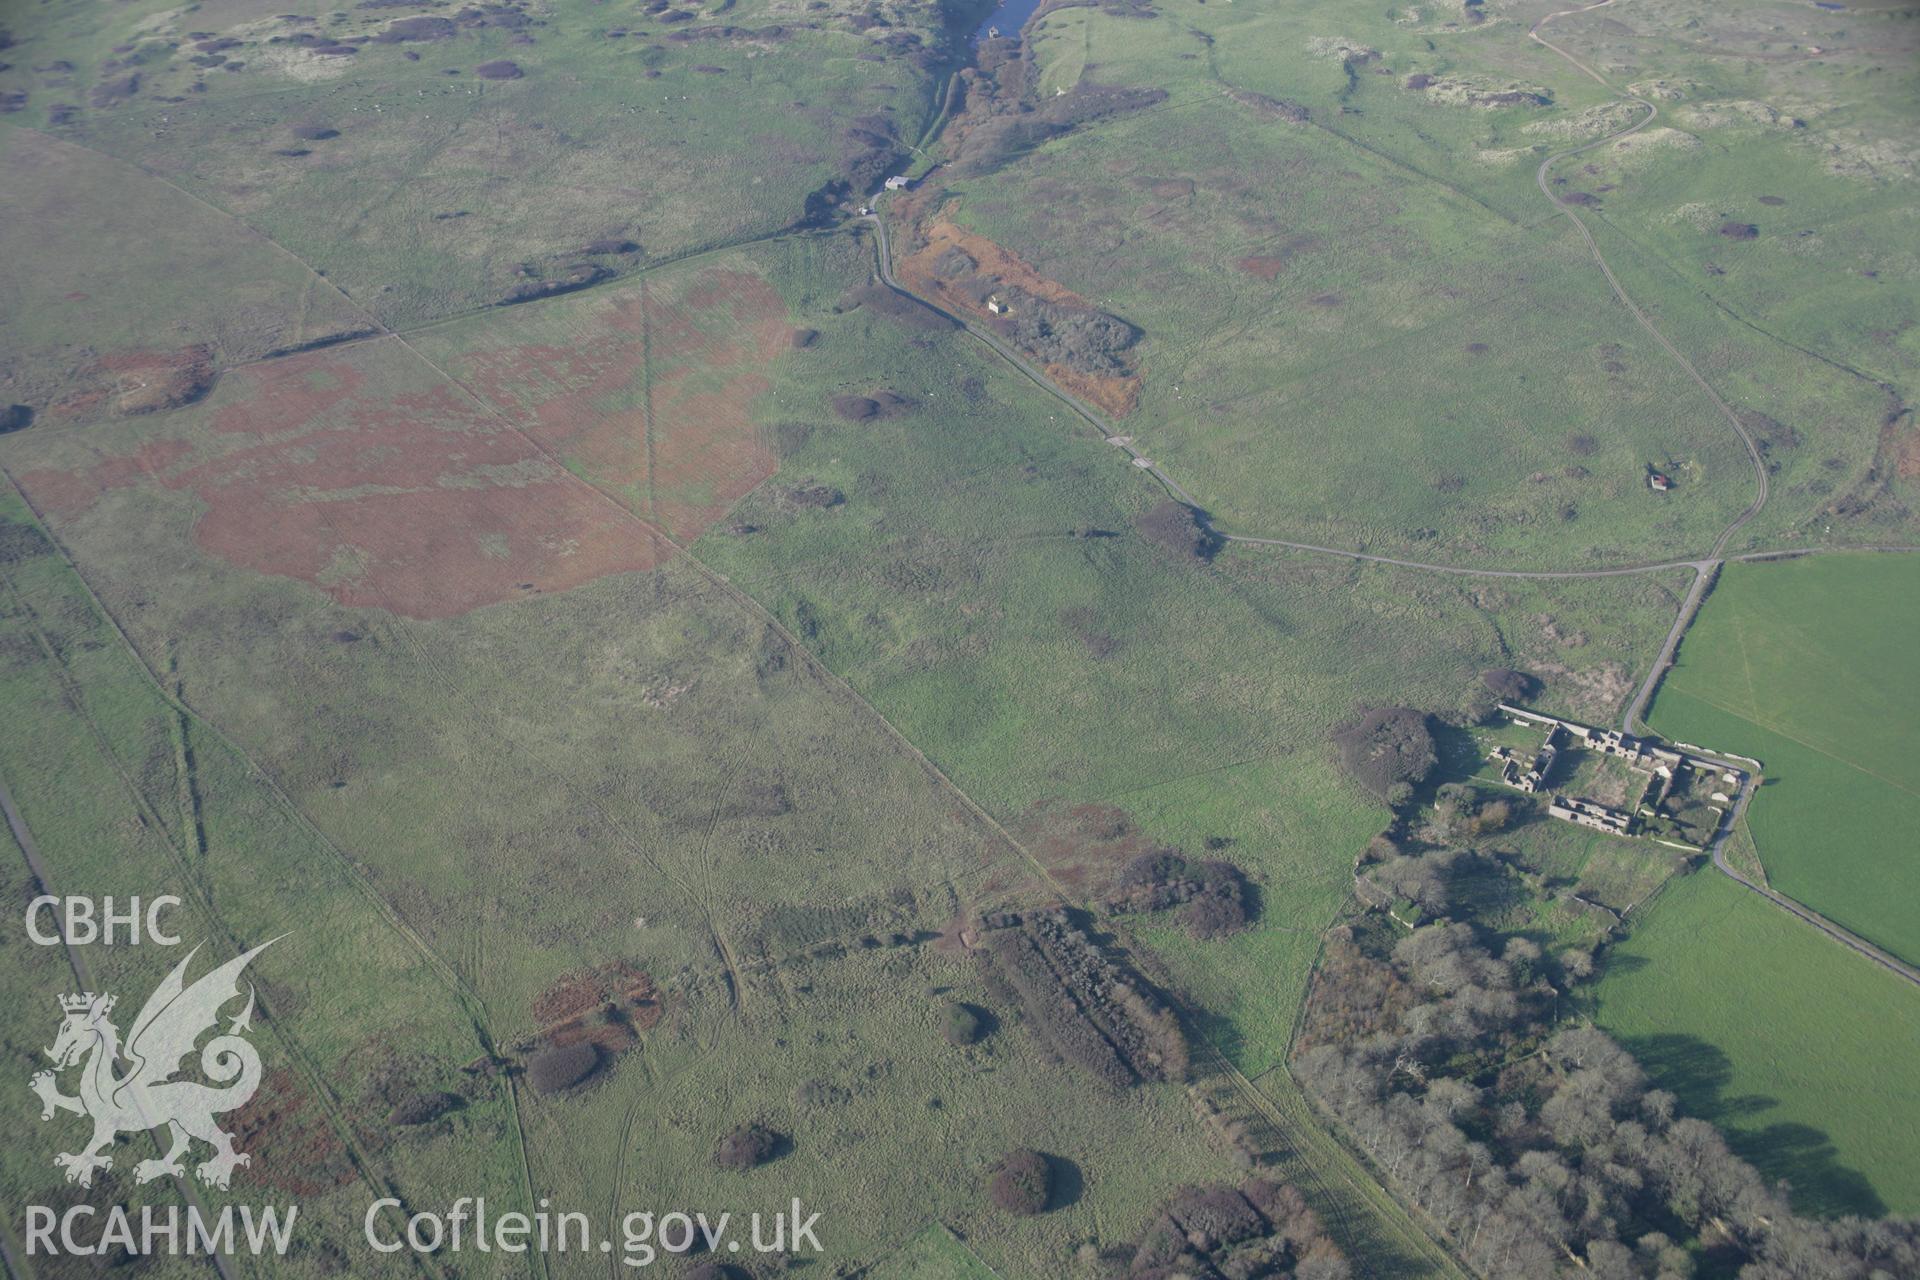 RCAHMW colour oblique aerial photograph of Brownslade Round Barrow, early medieval cemetery, and Brownslade Home Farm, Castlemartin, in general view from the east. Taken on 19 November 2005 by Toby Driver